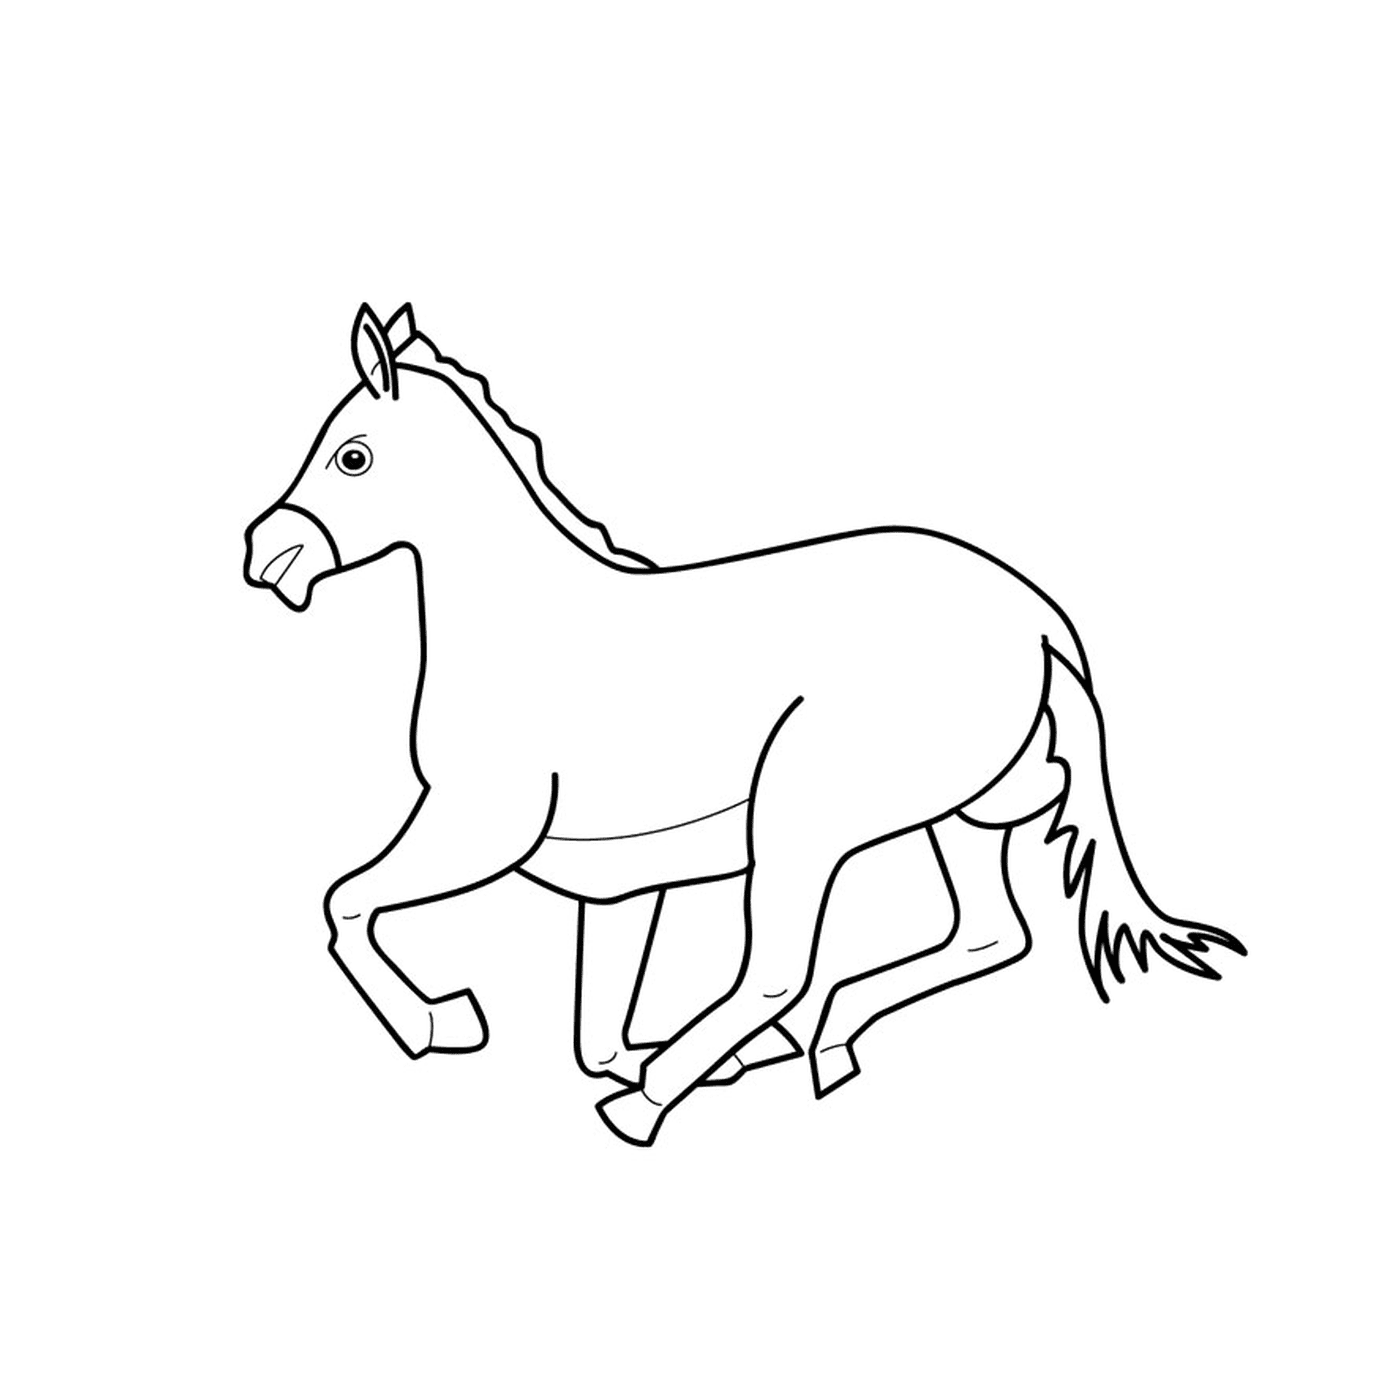  Horse with gallops - A horse running 